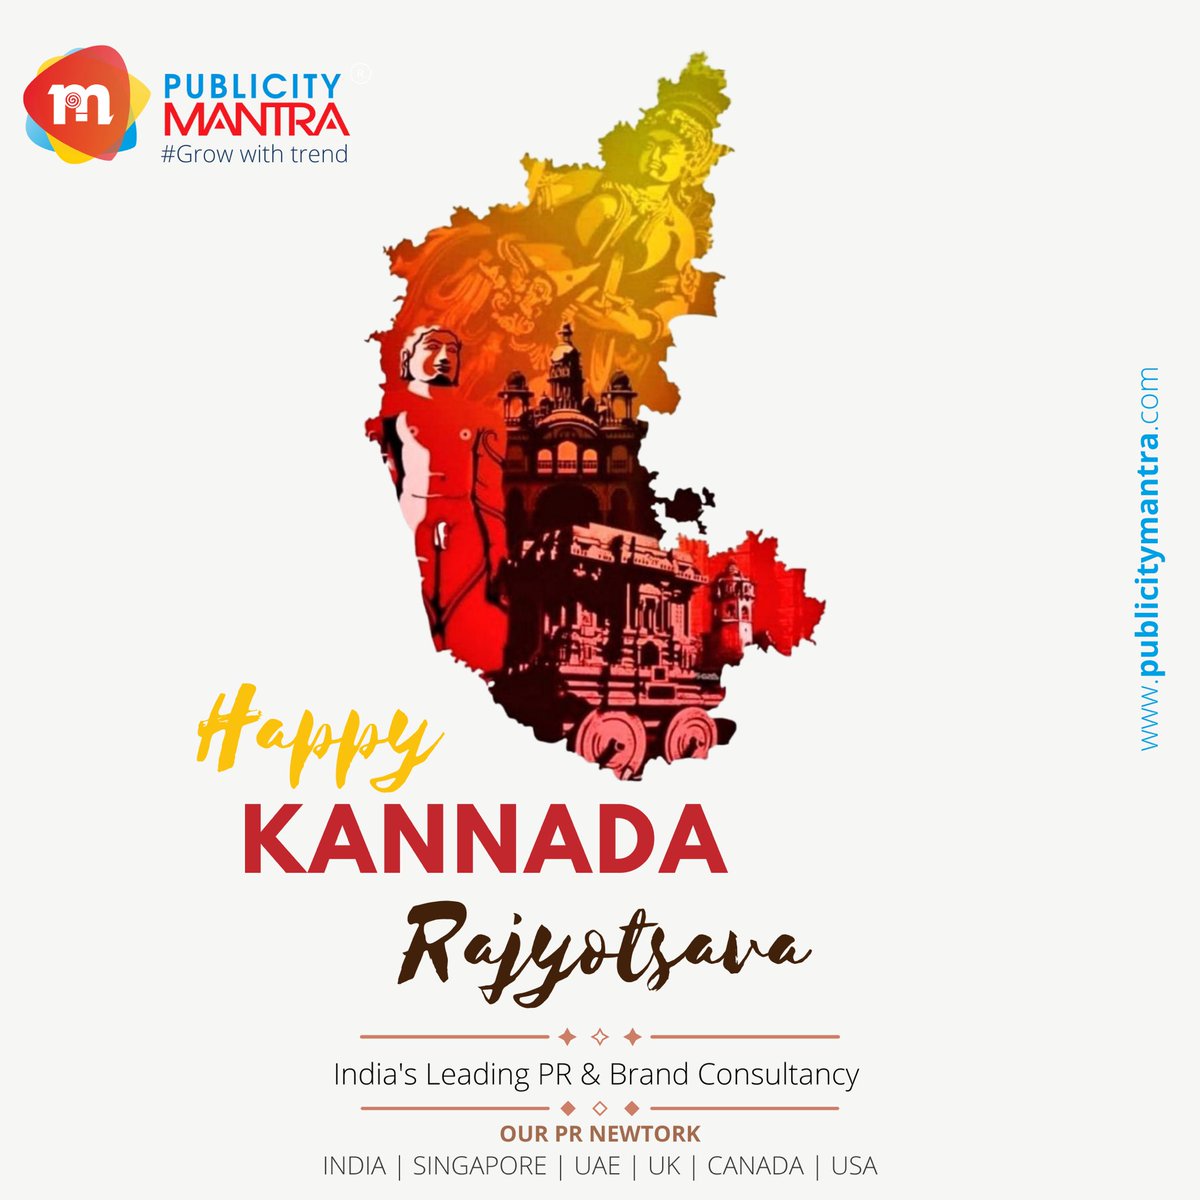 My roots are still associated with the energetic land of Karnataka! The friends, the people and their culture still gives the same sense of positivity and energy to me!

Happy #kannadarajyotsava2022 to all my friends, colleagues and well-wishers!

#PublicityMantra #AnoopMishra